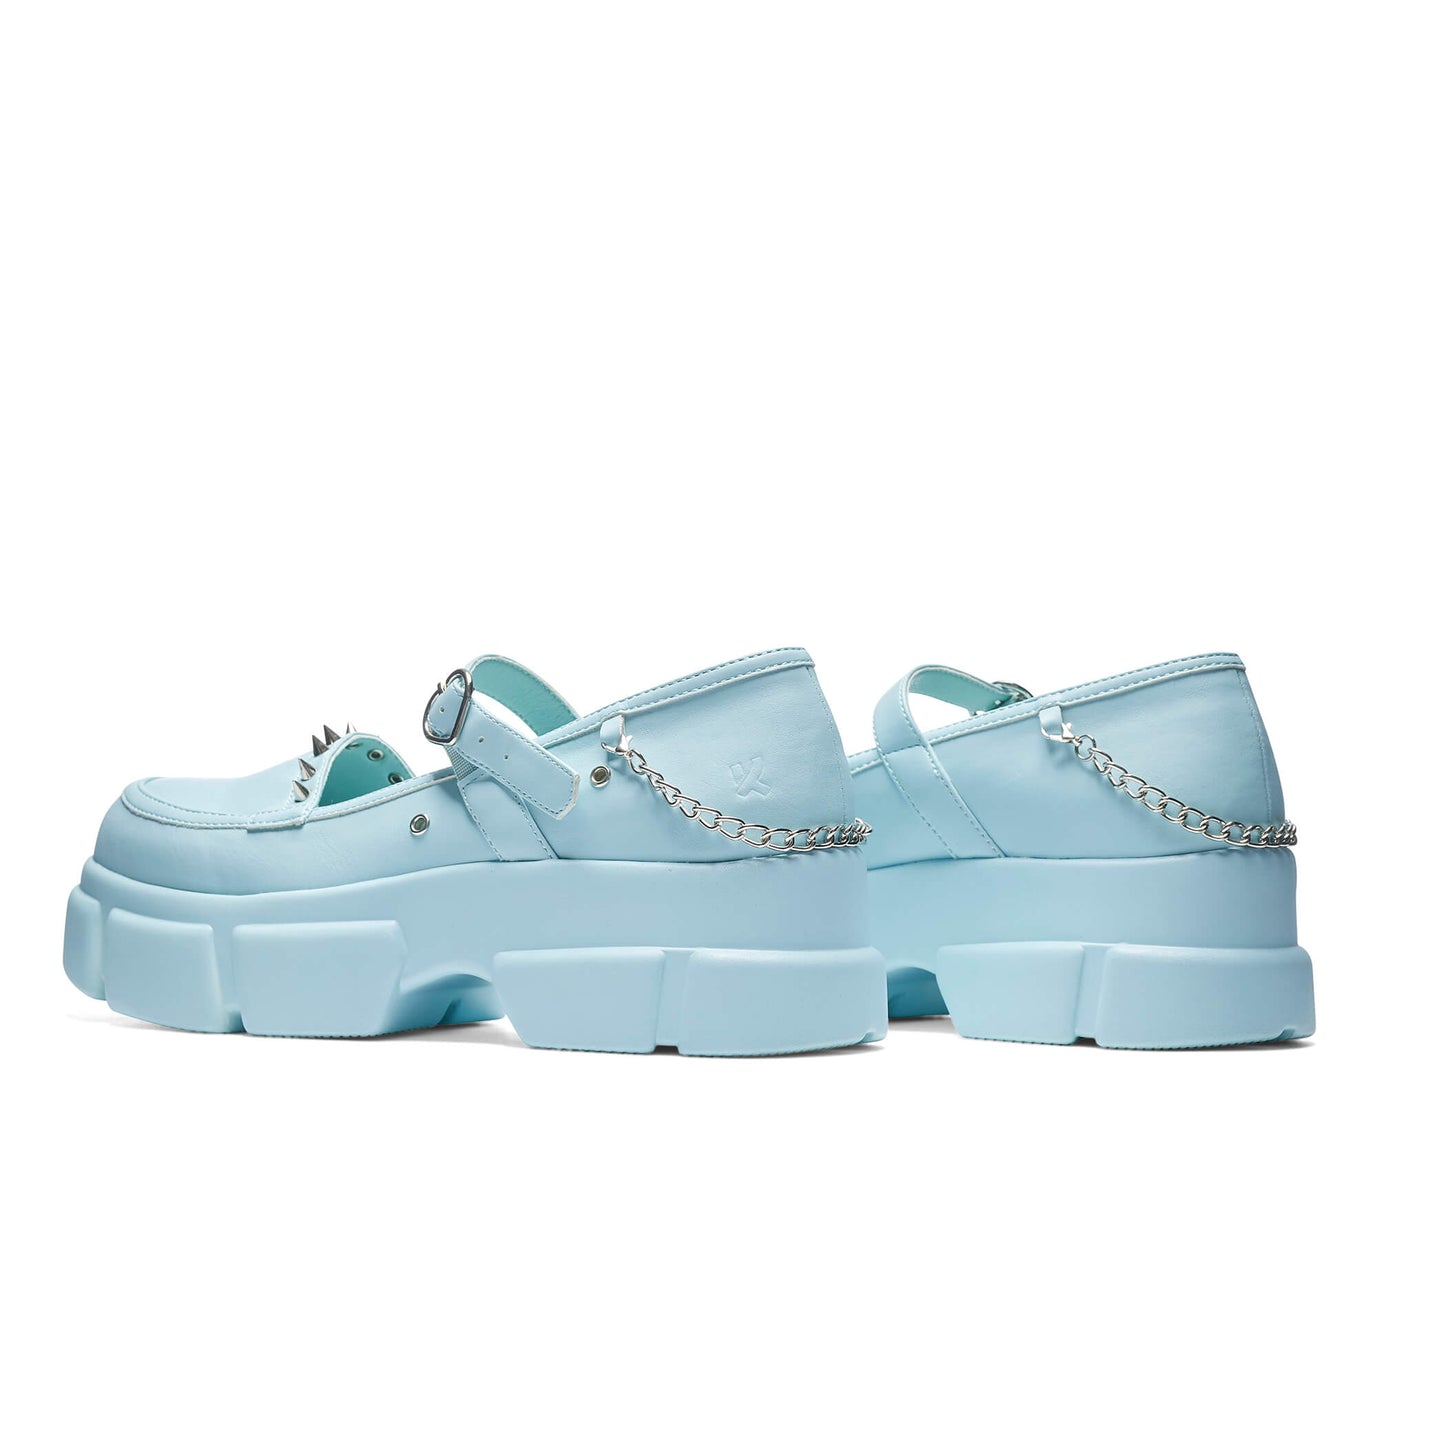 Cloud Mist Chunky Shoes - Baby Blue - Shoes - KOI Footwear - Blue - Back View